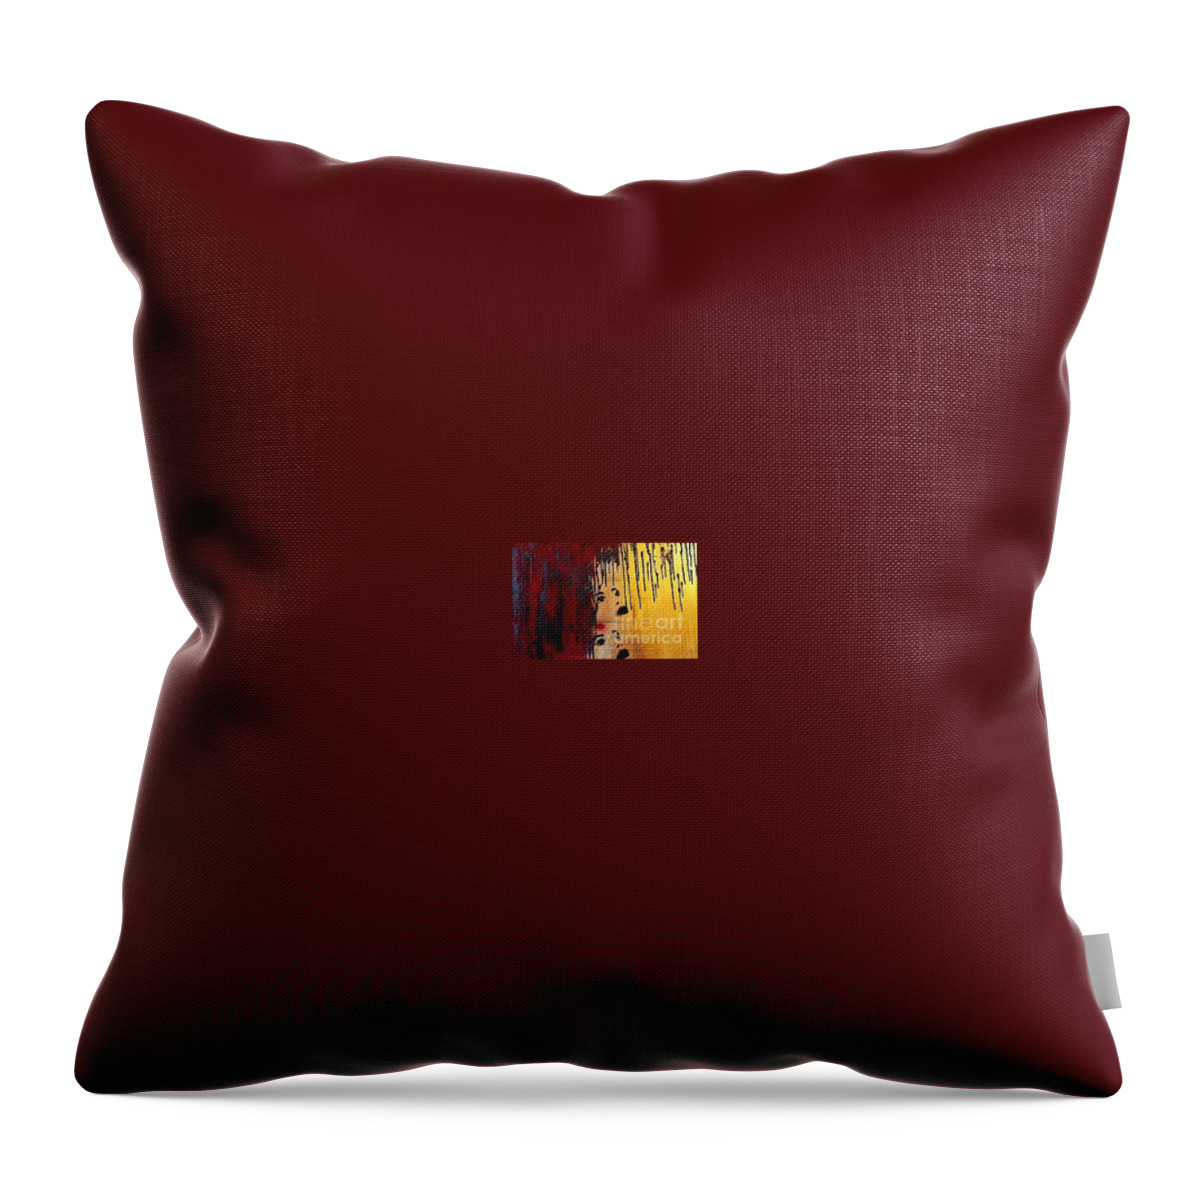  Throw Pillow featuring the painting Hopeful by Milisa Miner